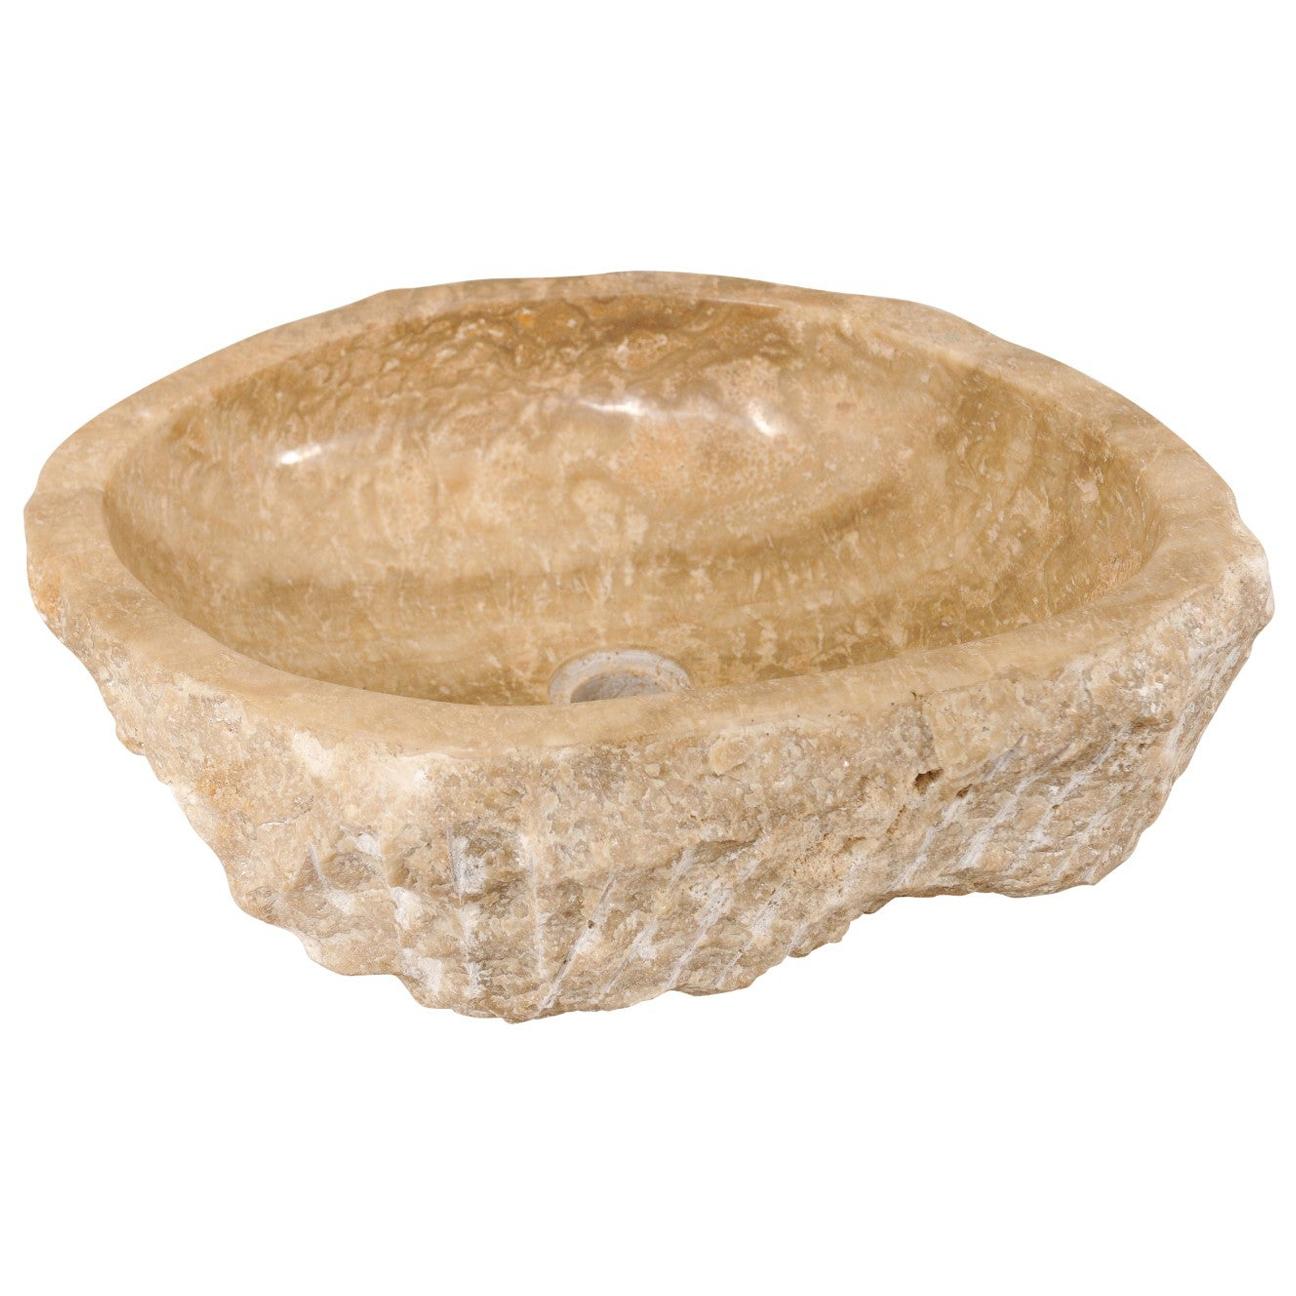 Beautiful Polished Onyx Rock Sink Basin in Neutral Cream and Brown Hues